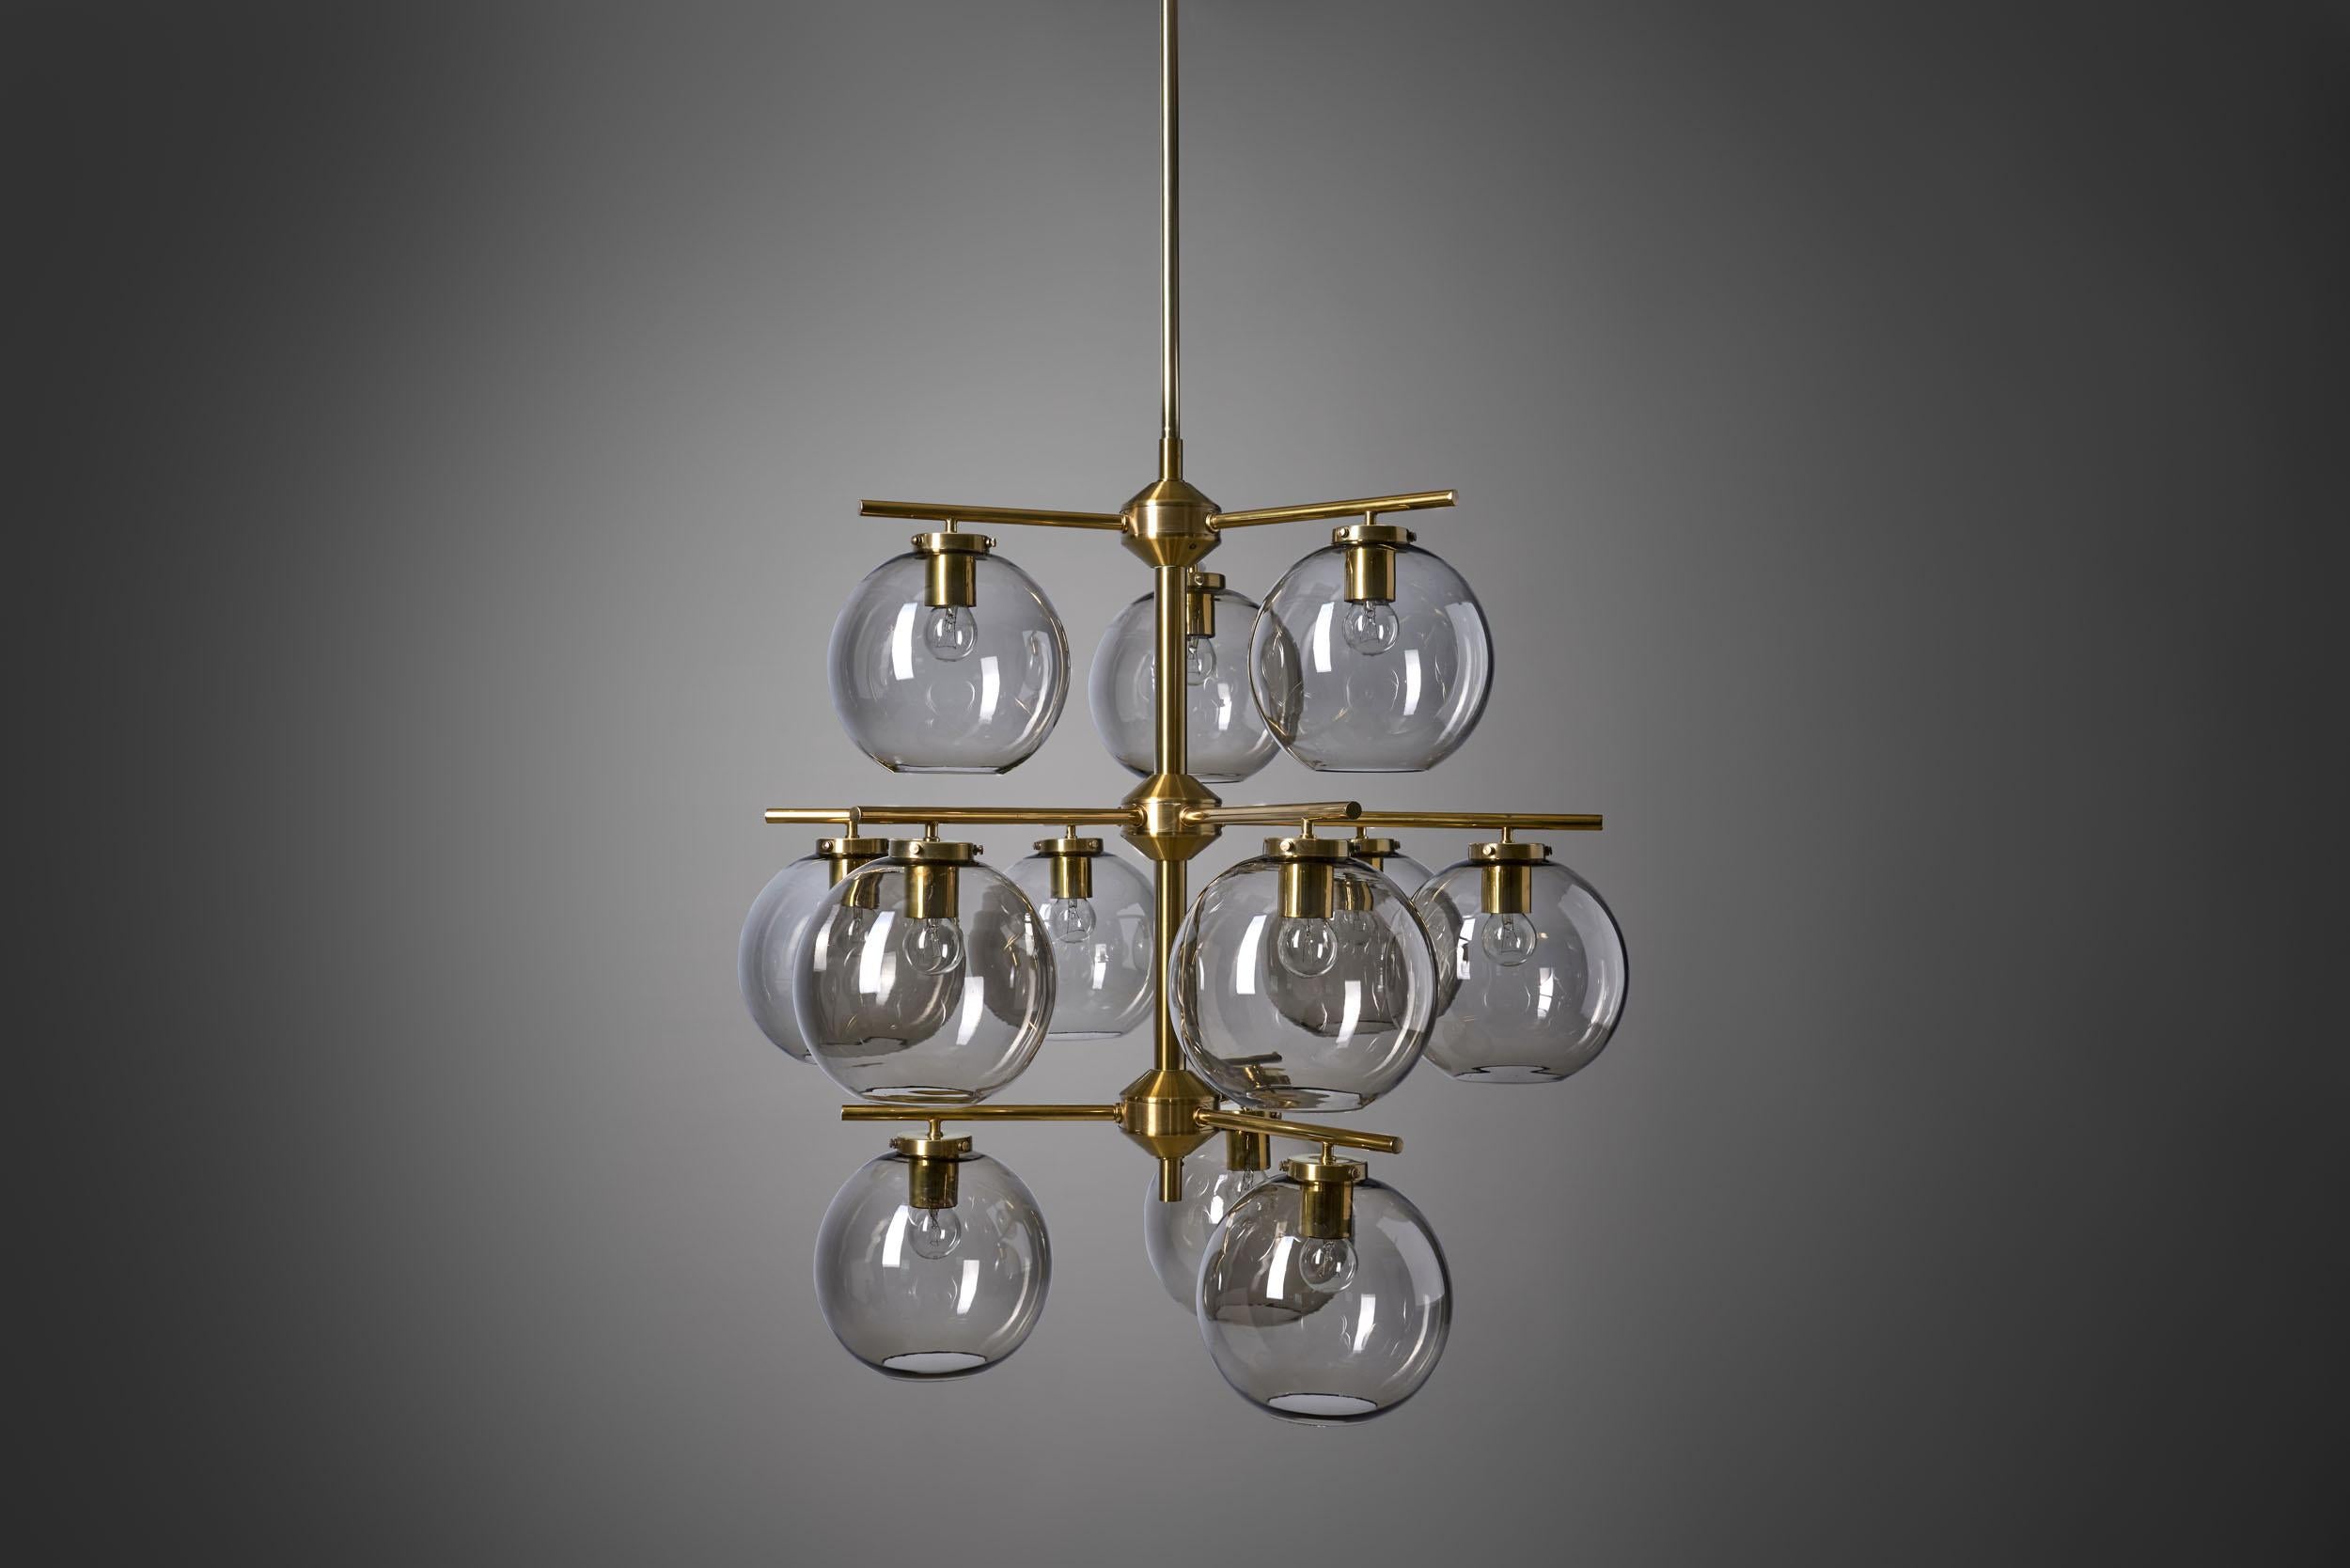 Brass Holger Johansson Chandelier with 12 Smoked Glass Shades for Westal, Sweden 1960s